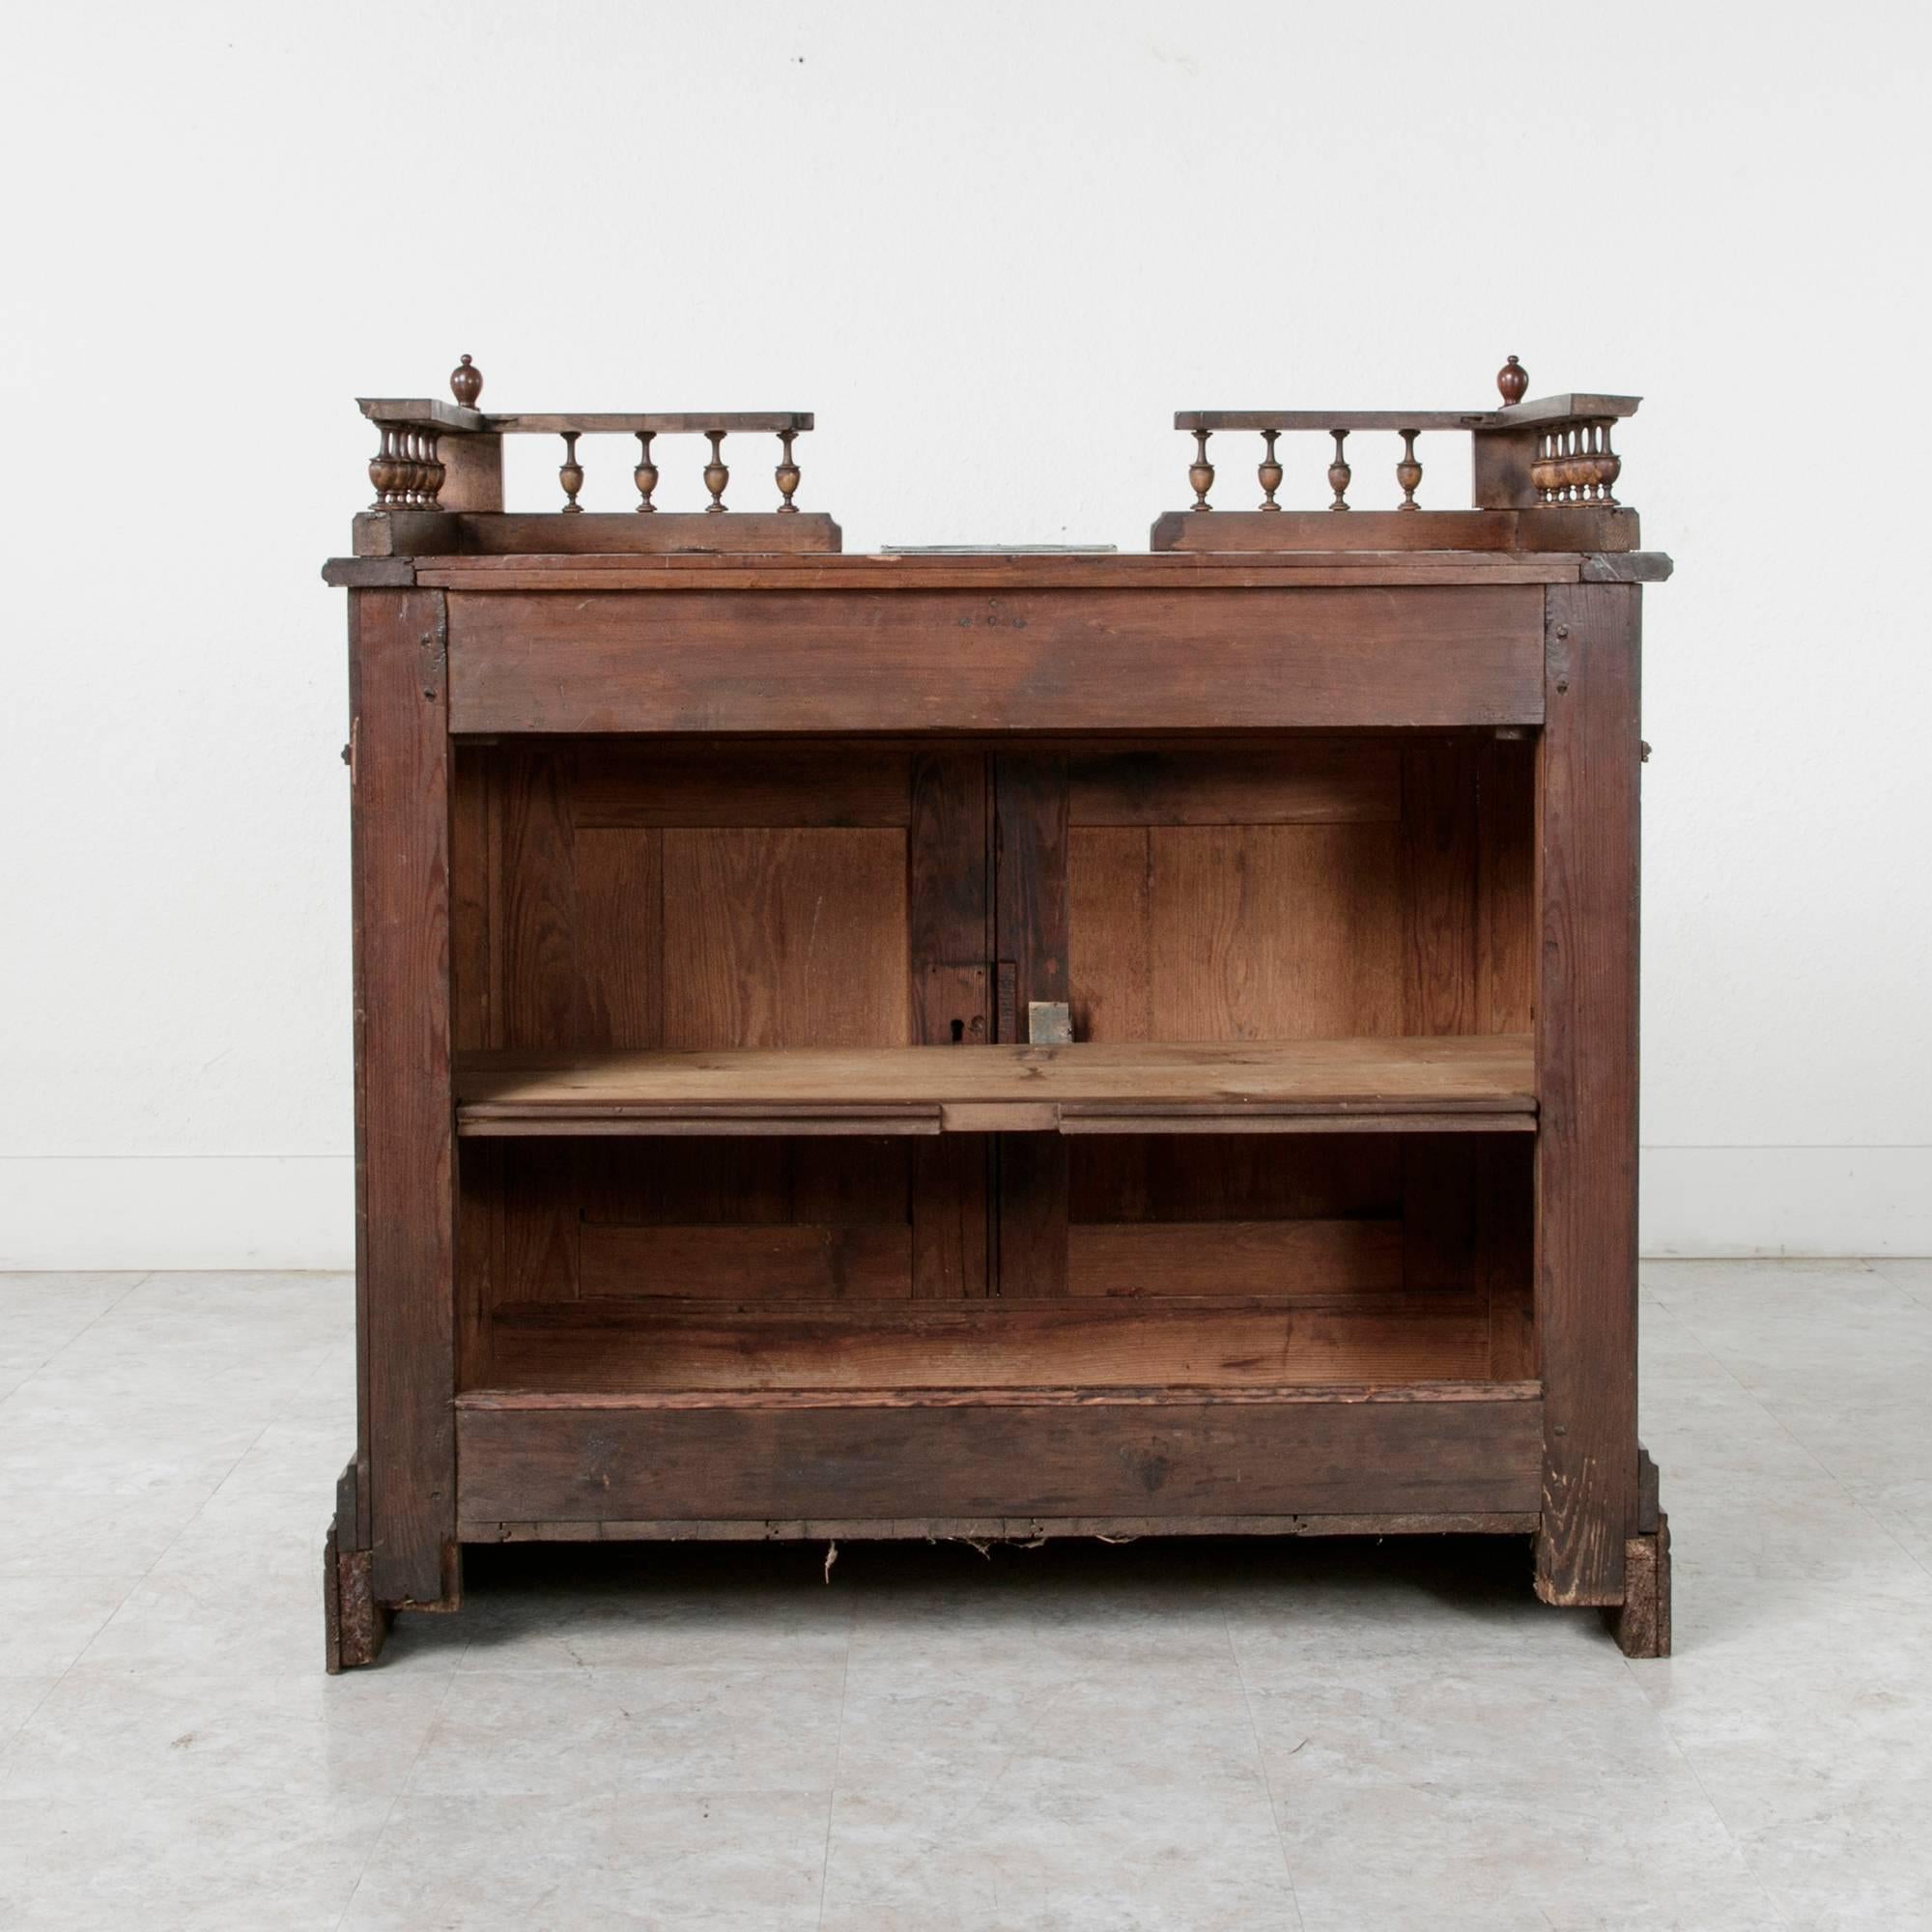 Metal French Pitch Pine Shop Counter or Dry Bar with Spooled Gallery, circa 1900